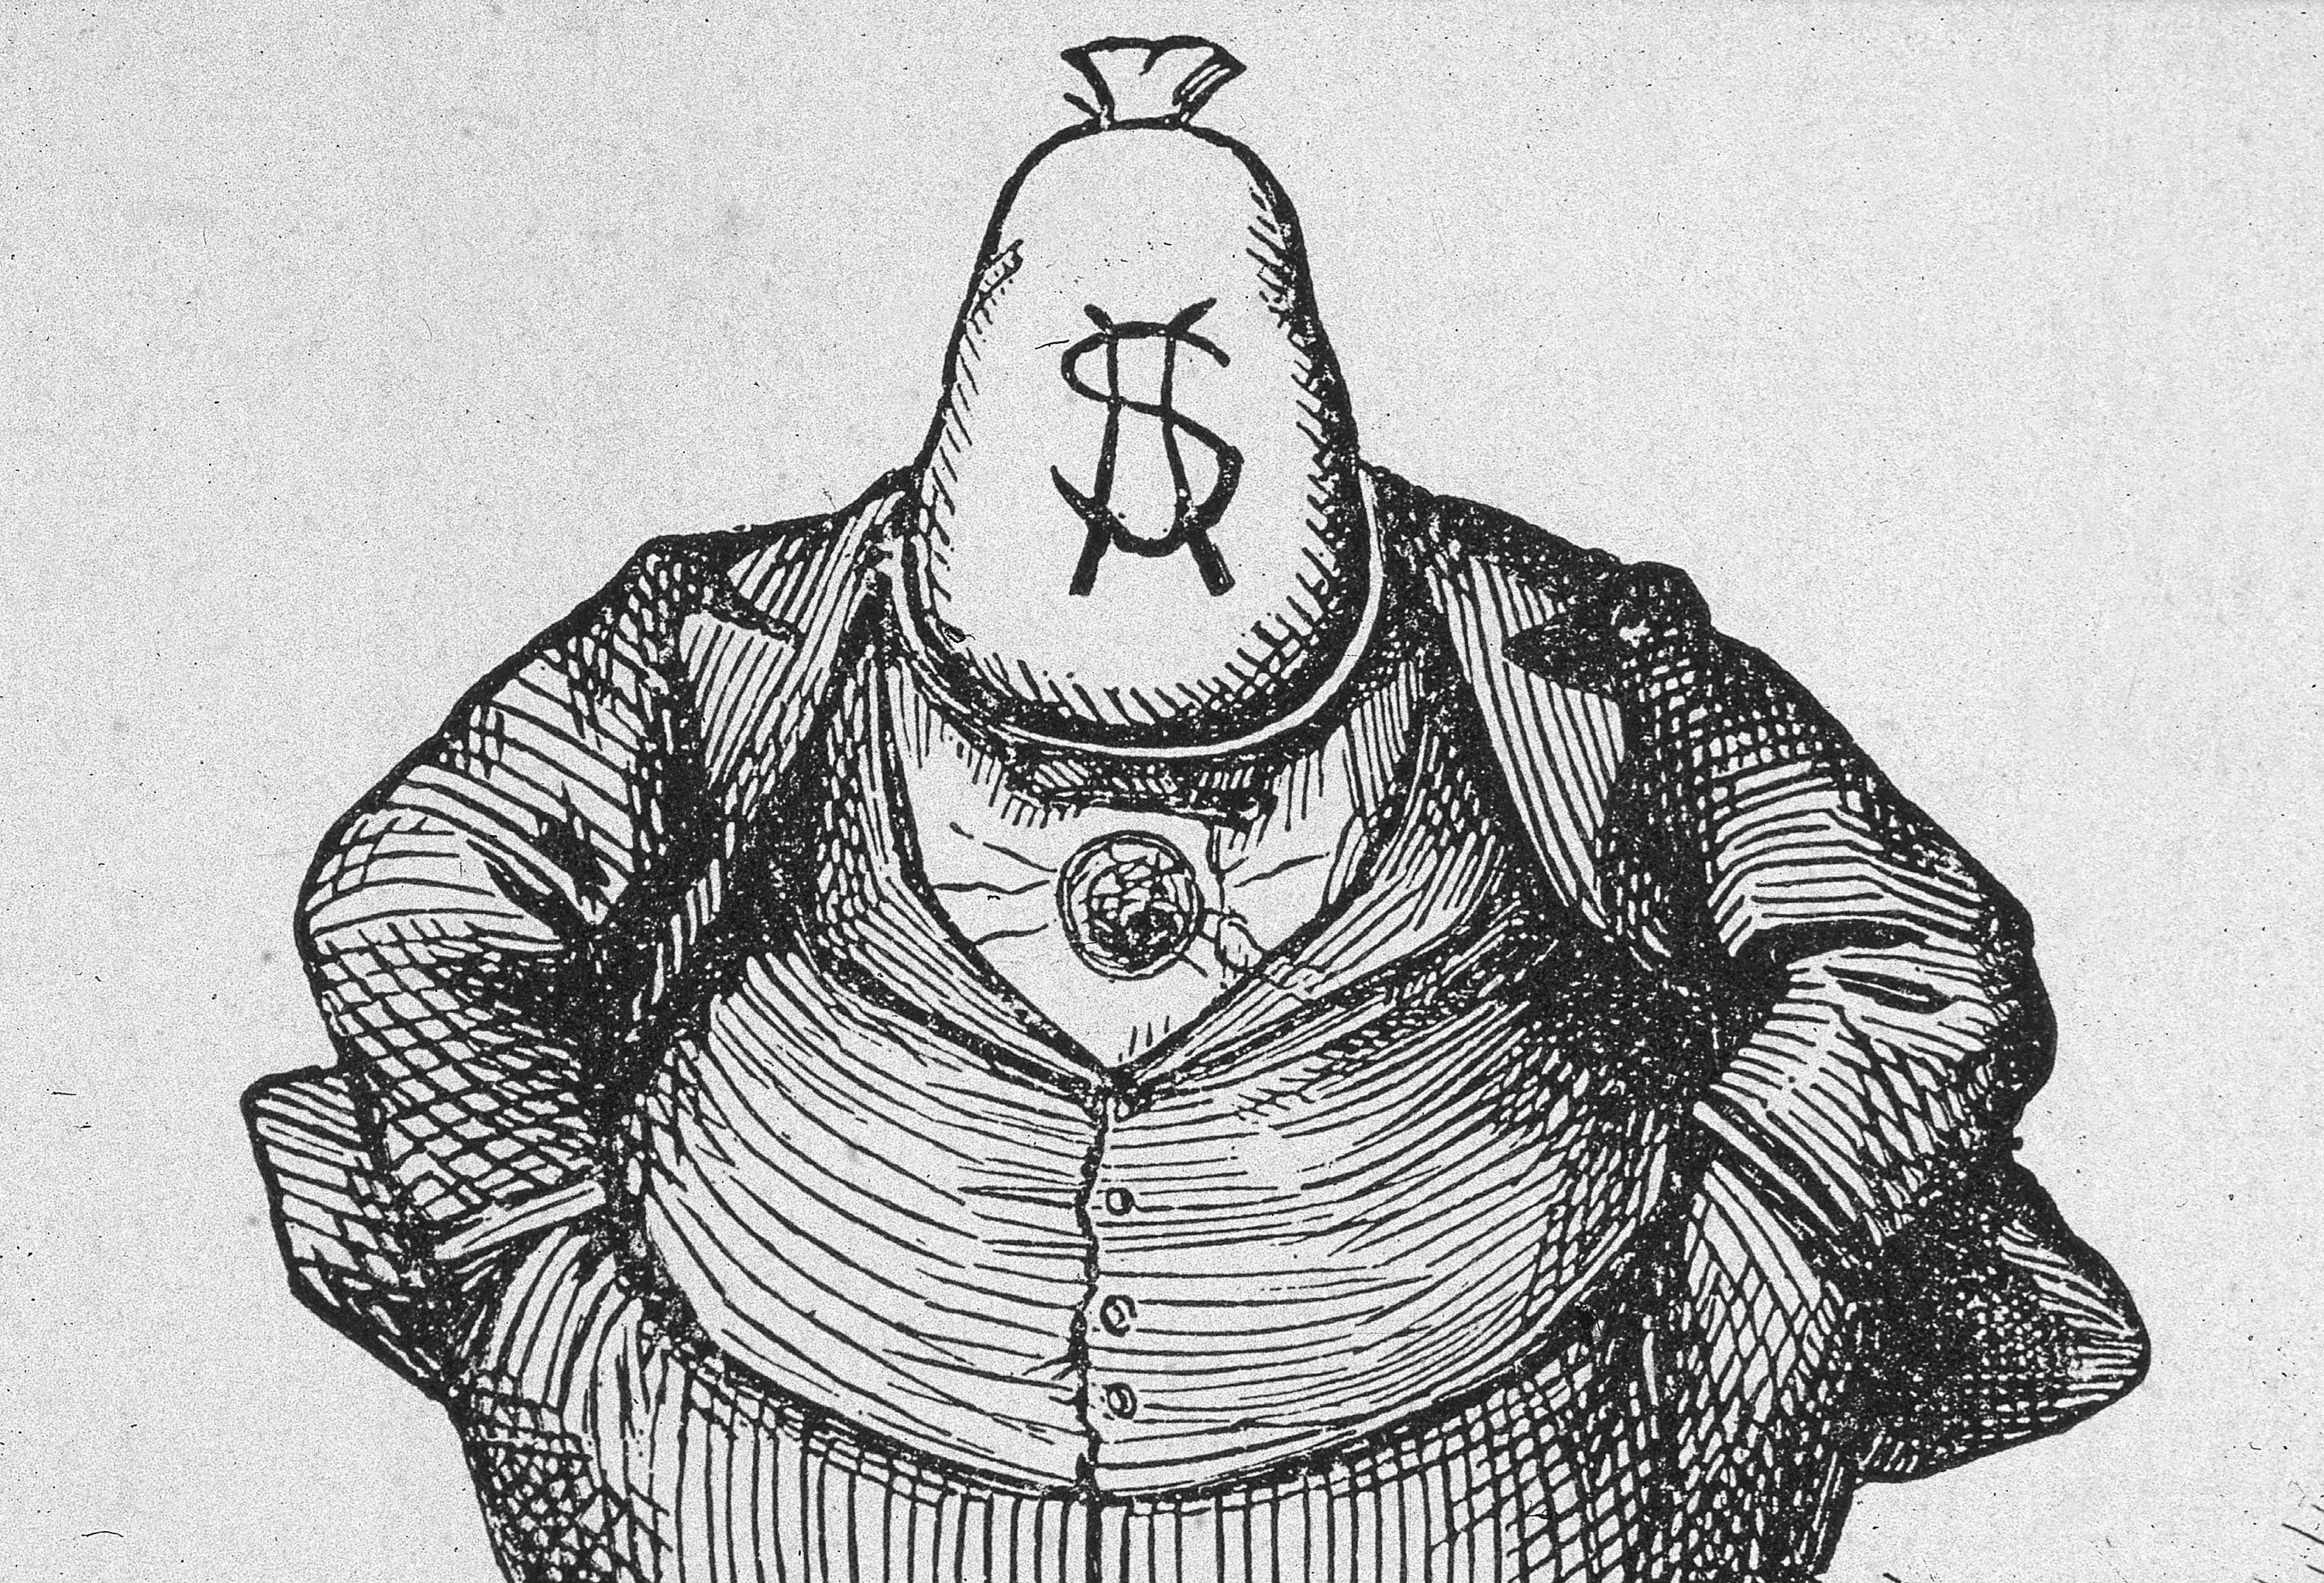 Cartoon of a man with large moneybag for a head